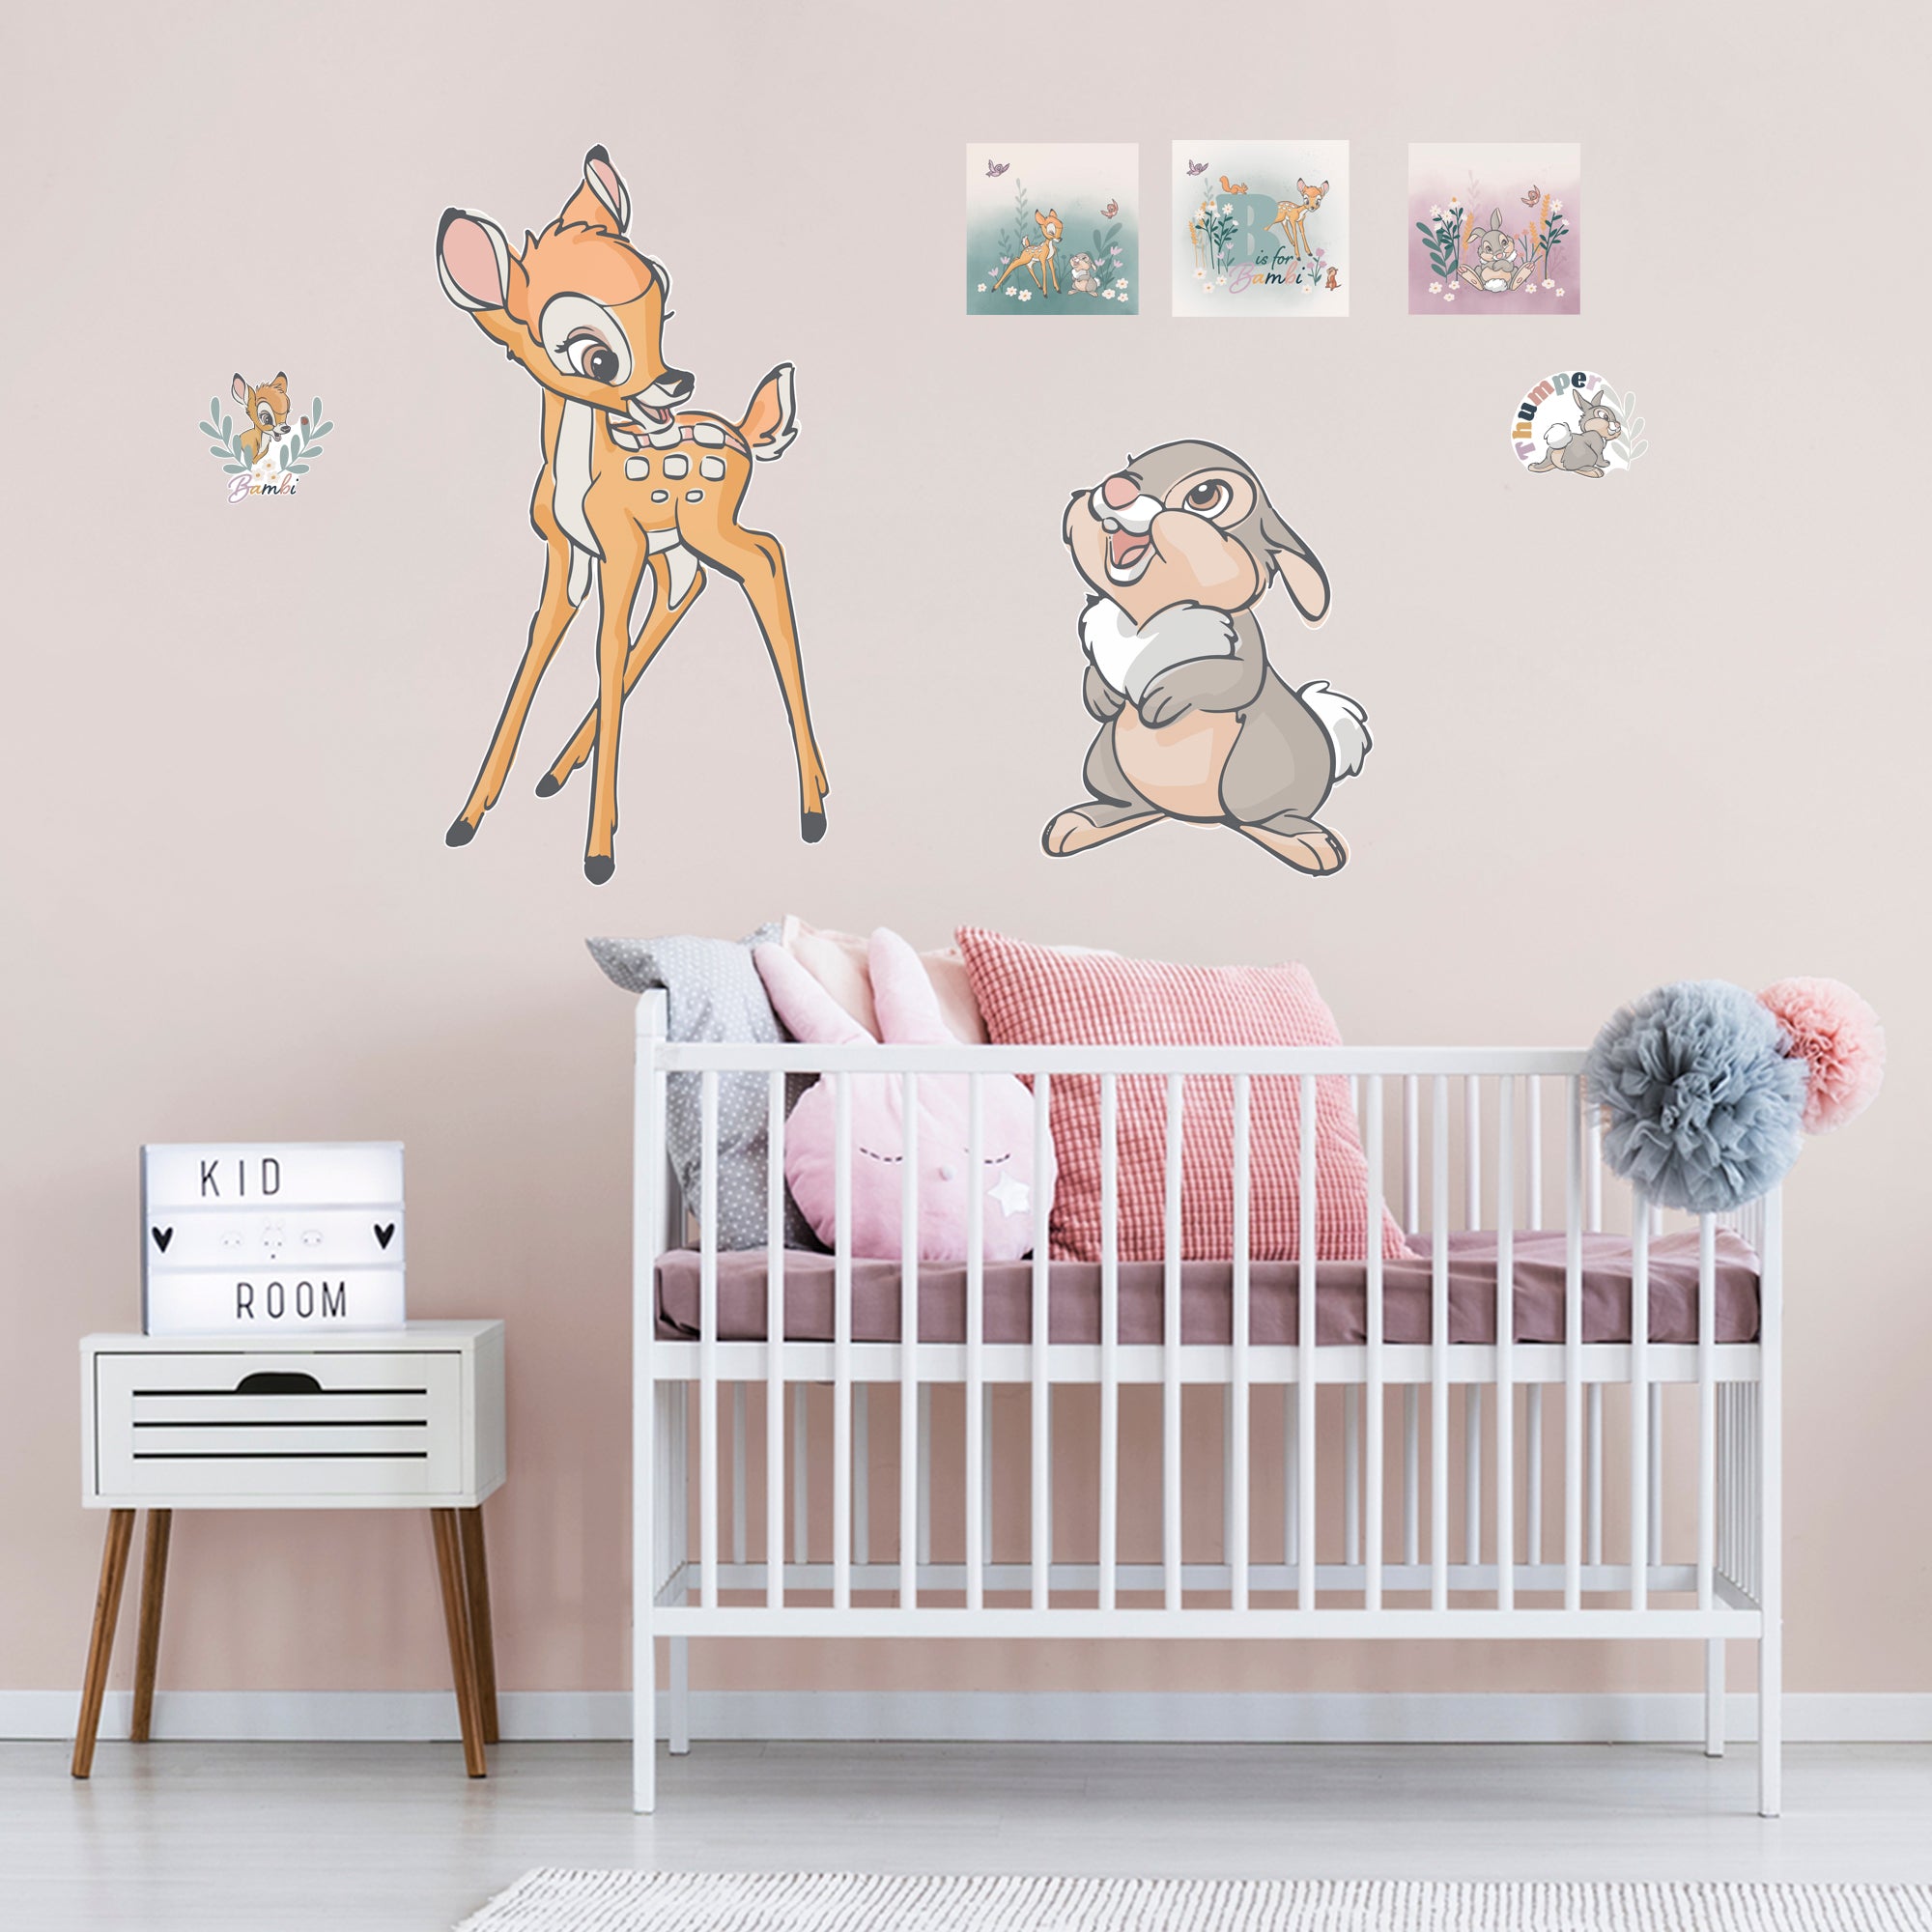 Bambi and Thumper Before the Bloom - Officially Licensed Disney Removable Wall Decal Giant Character + 6 Decals (23"W x 43"H) by